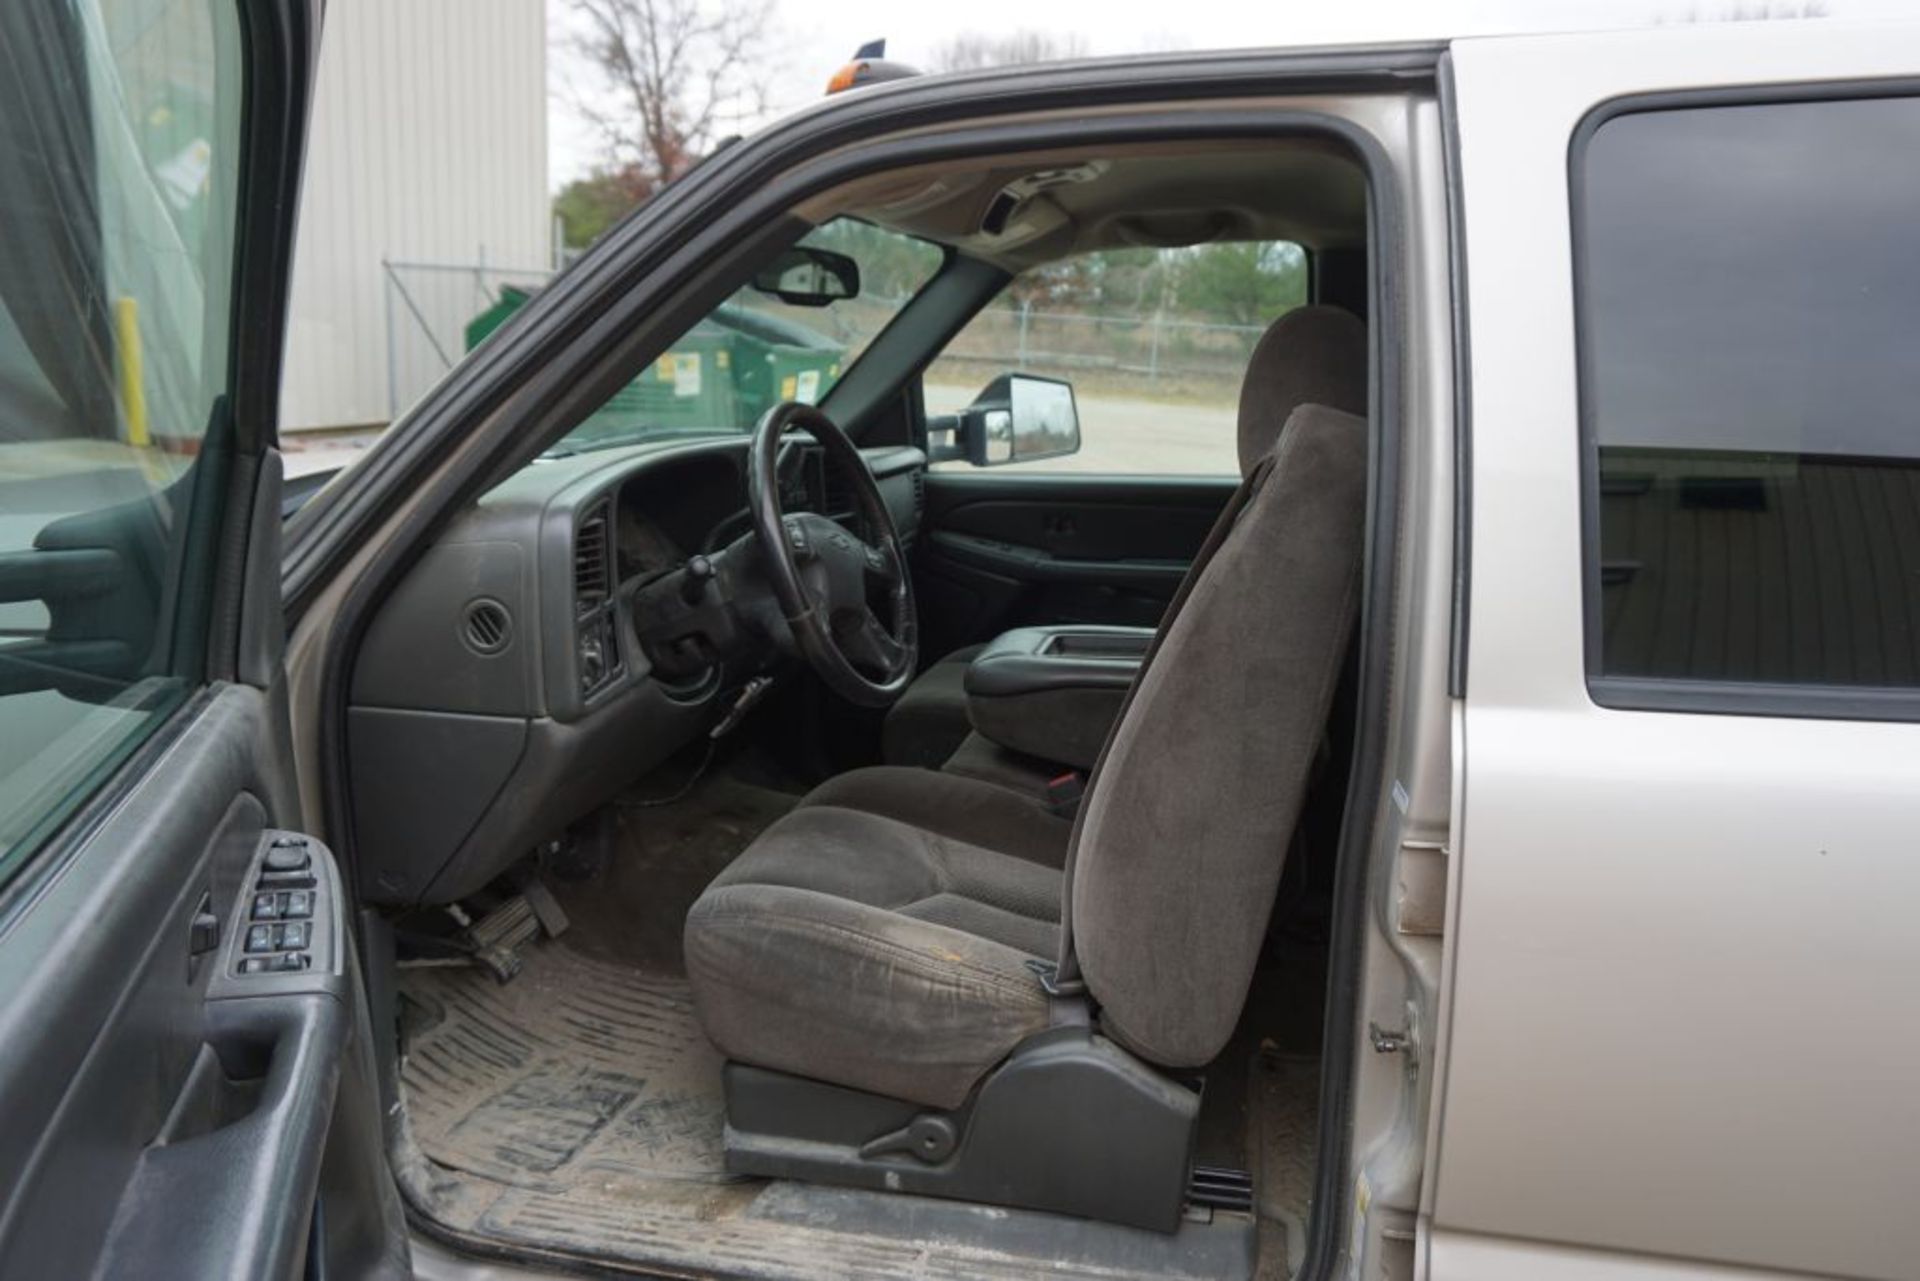 2007 Chevy Silverado 3500 2 WD Pickup Truck|VIN: 1GCJC33D57F159034; Approx. 320,450 Miles; Crew Cab; - Image 16 of 30